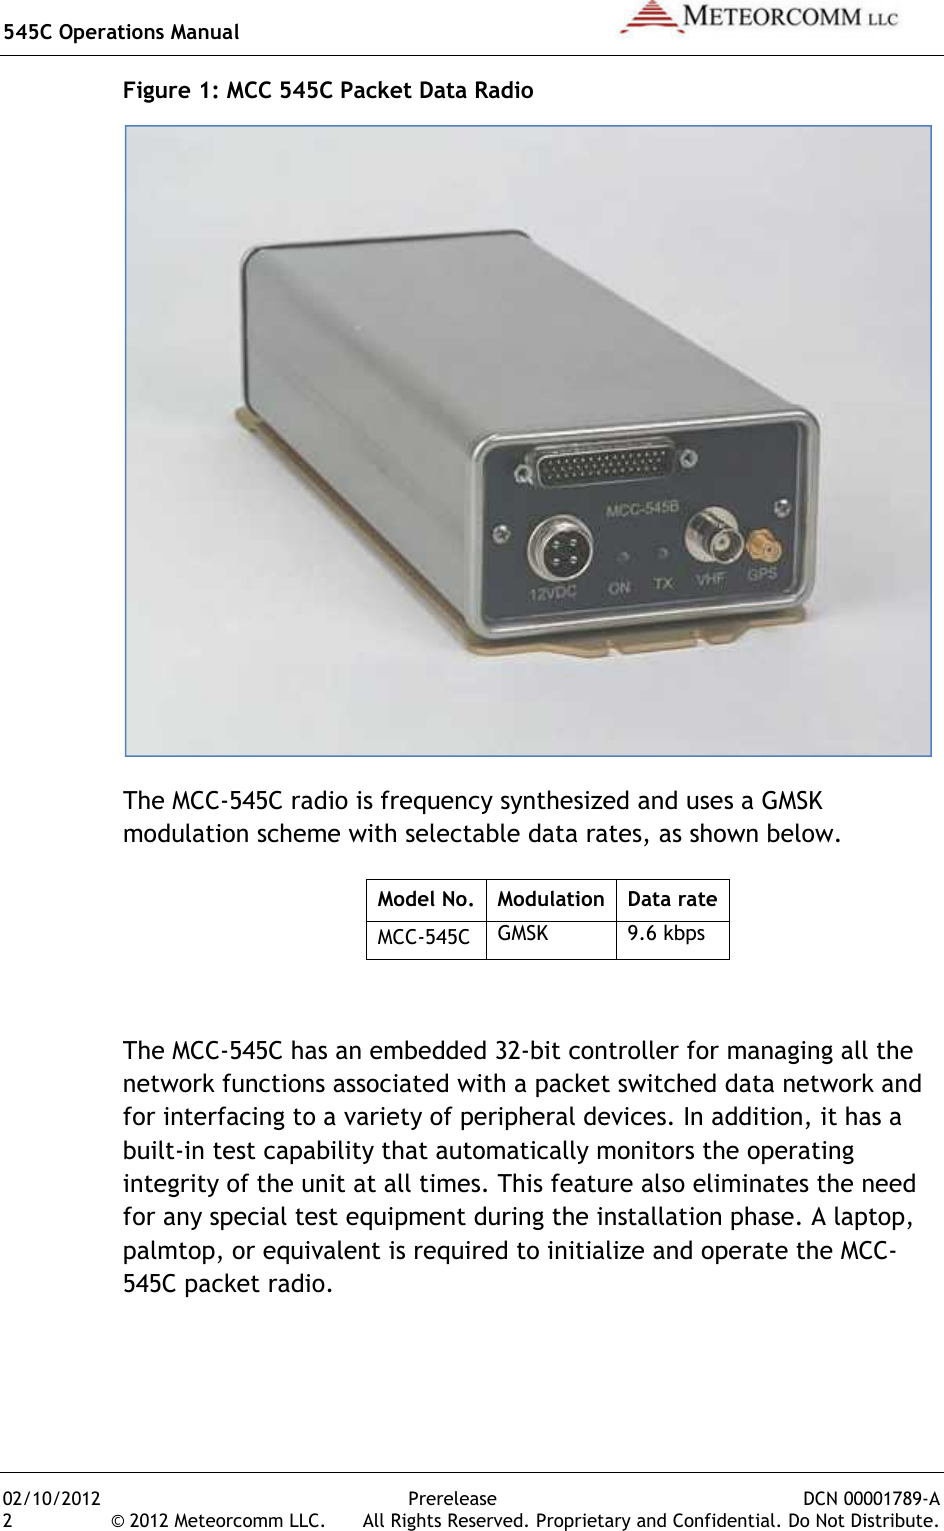 545C Operations Manual   02/10/2012  Prerelease  DCN 00001789-A 2  © 2012 Meteorcomm LLC.   All Rights Reserved. Proprietary and Confidential. Do Not Distribute. Figure 1: MCC 545C Packet Data Radio  The MCC-545C radio is frequency synthesized and uses a GMSK modulation scheme with selectable data rates, as shown below. Model No. Modulation Data rate MCC-545C GMSK 9.6 kbps  The MCC-545C has an embedded 32-bit controller for managing all the network functions associated with a packet switched data network and for interfacing to a variety of peripheral devices. In addition, it has a built-in test capability that automatically monitors the operating integrity of the unit at all times. This feature also eliminates the need for any special test equipment during the installation phase. A laptop, palmtop, or equivalent is required to initialize and operate the MCC-545C packet radio. 